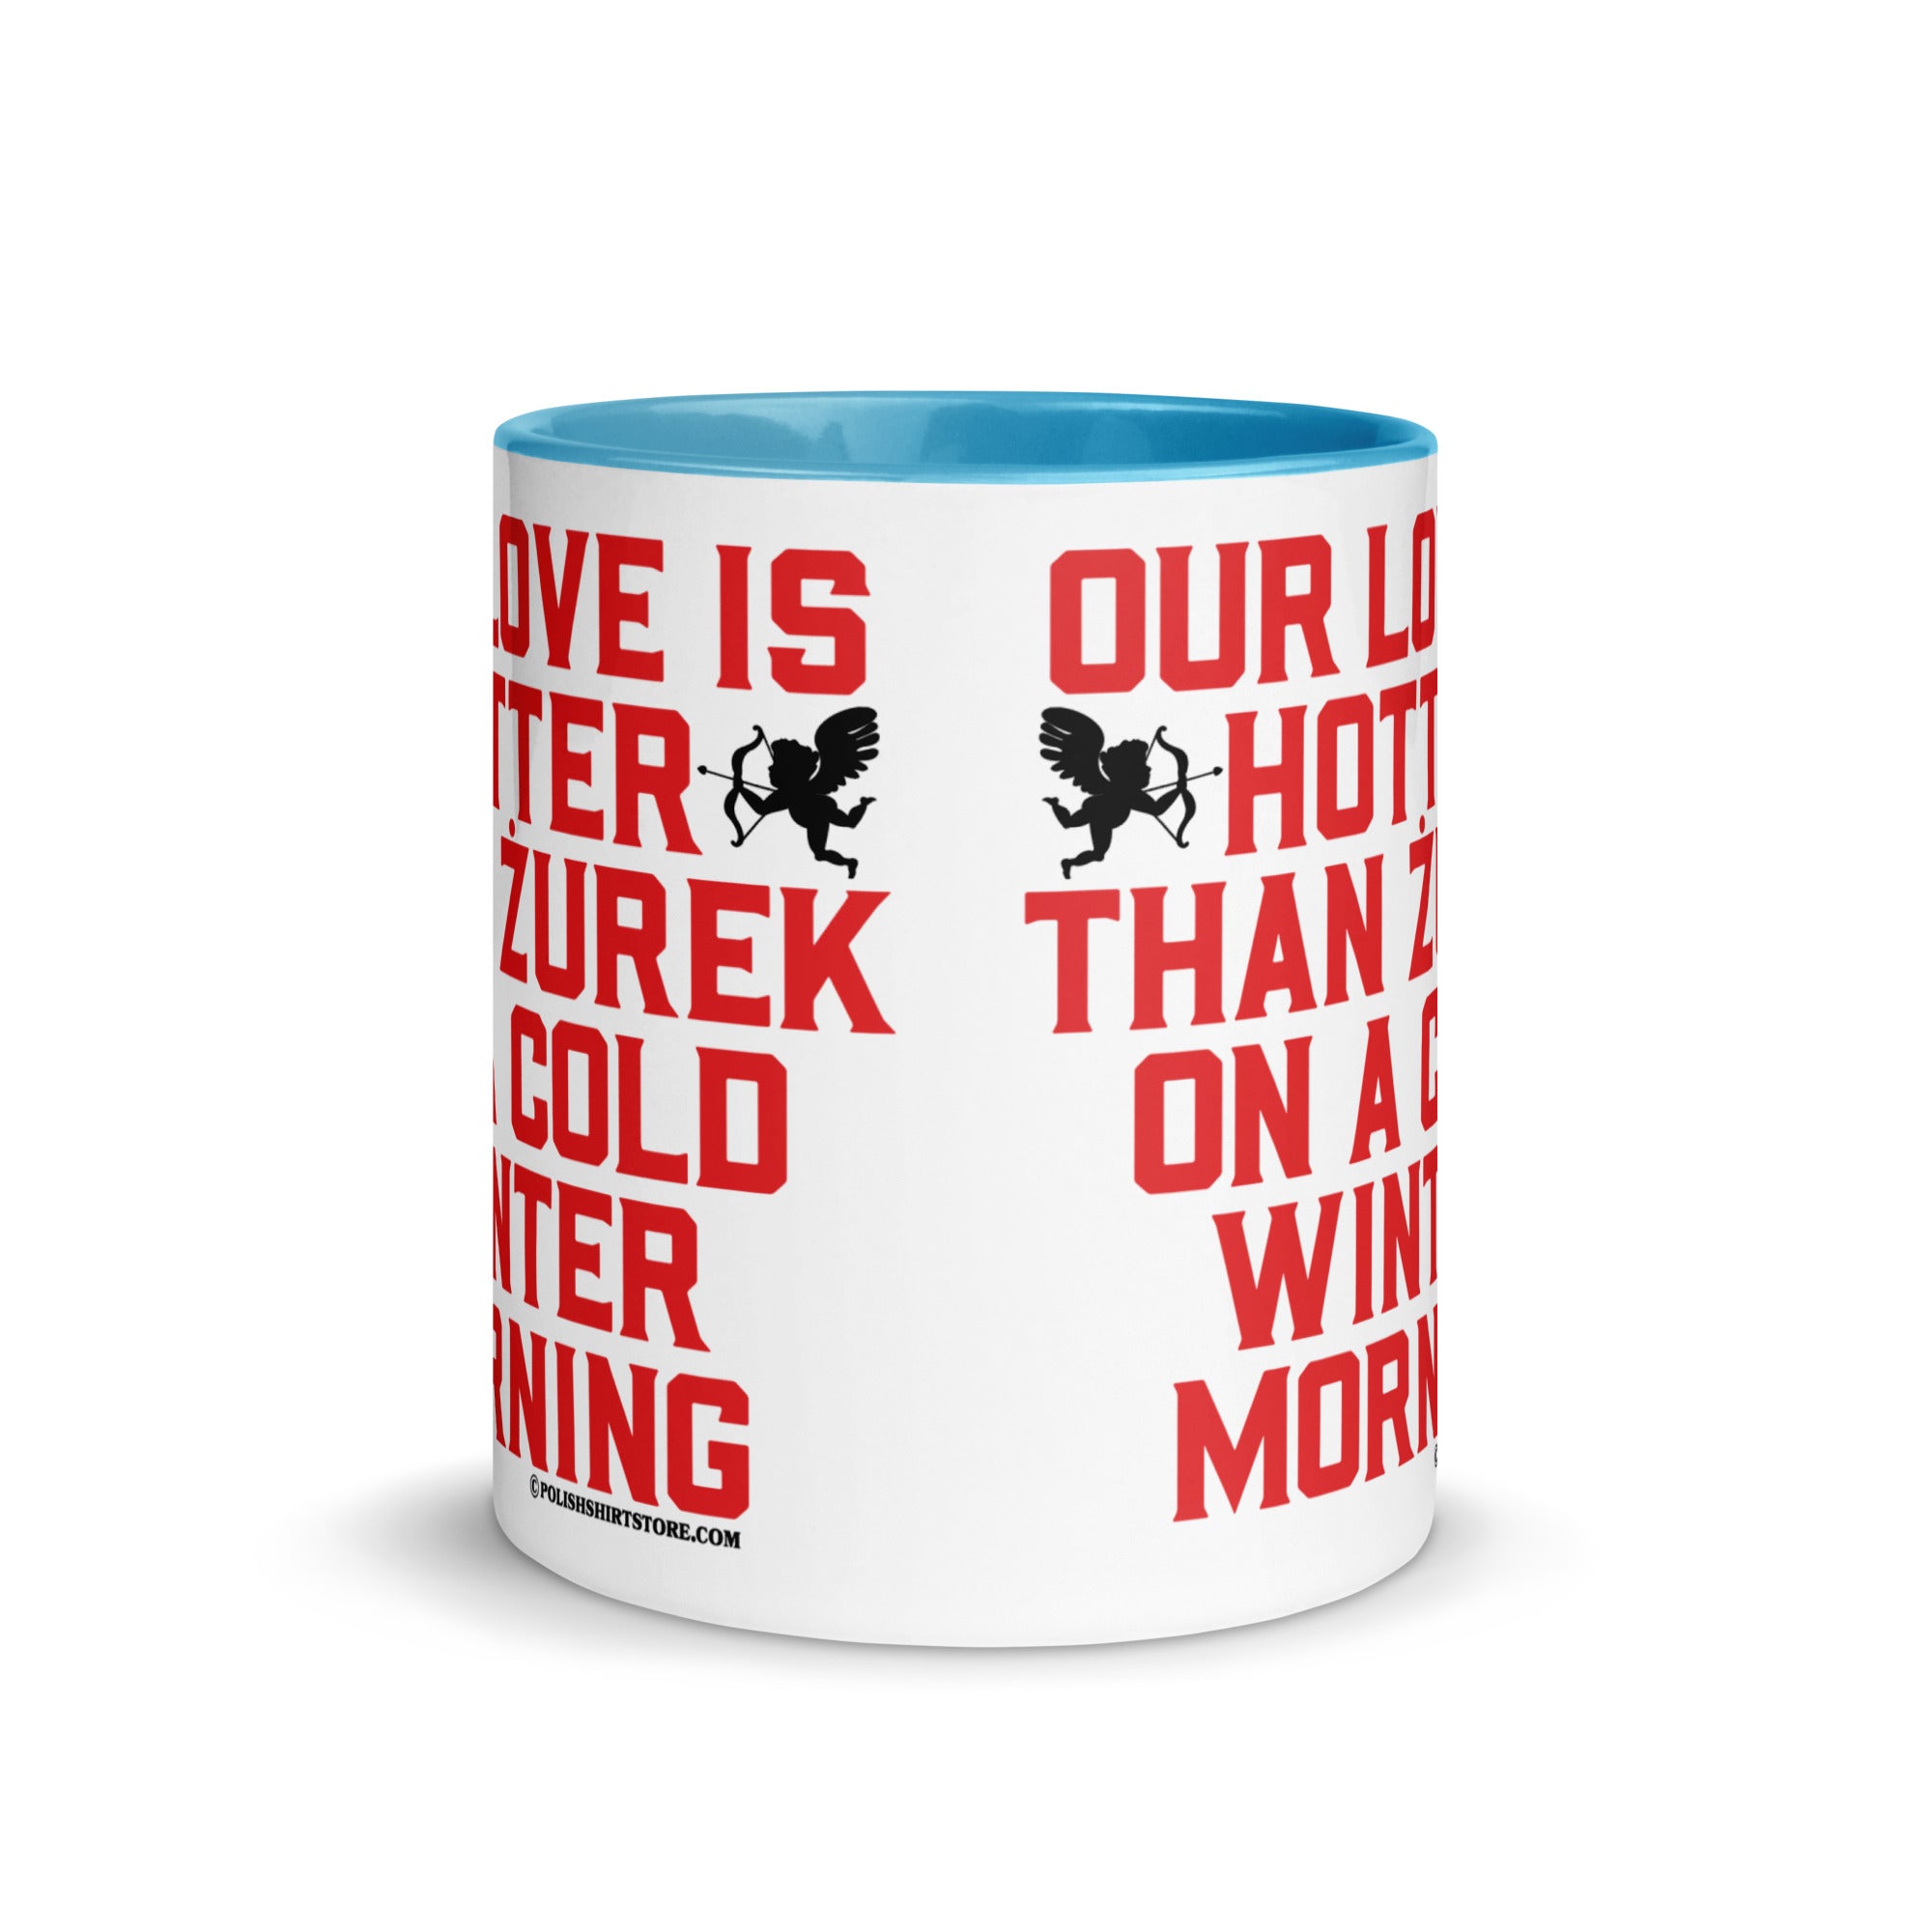 Our Love Is Hotter Than Zurek On A Cold Winter Morning Coffee Mug with Color Inside  Polish Shirt Store   